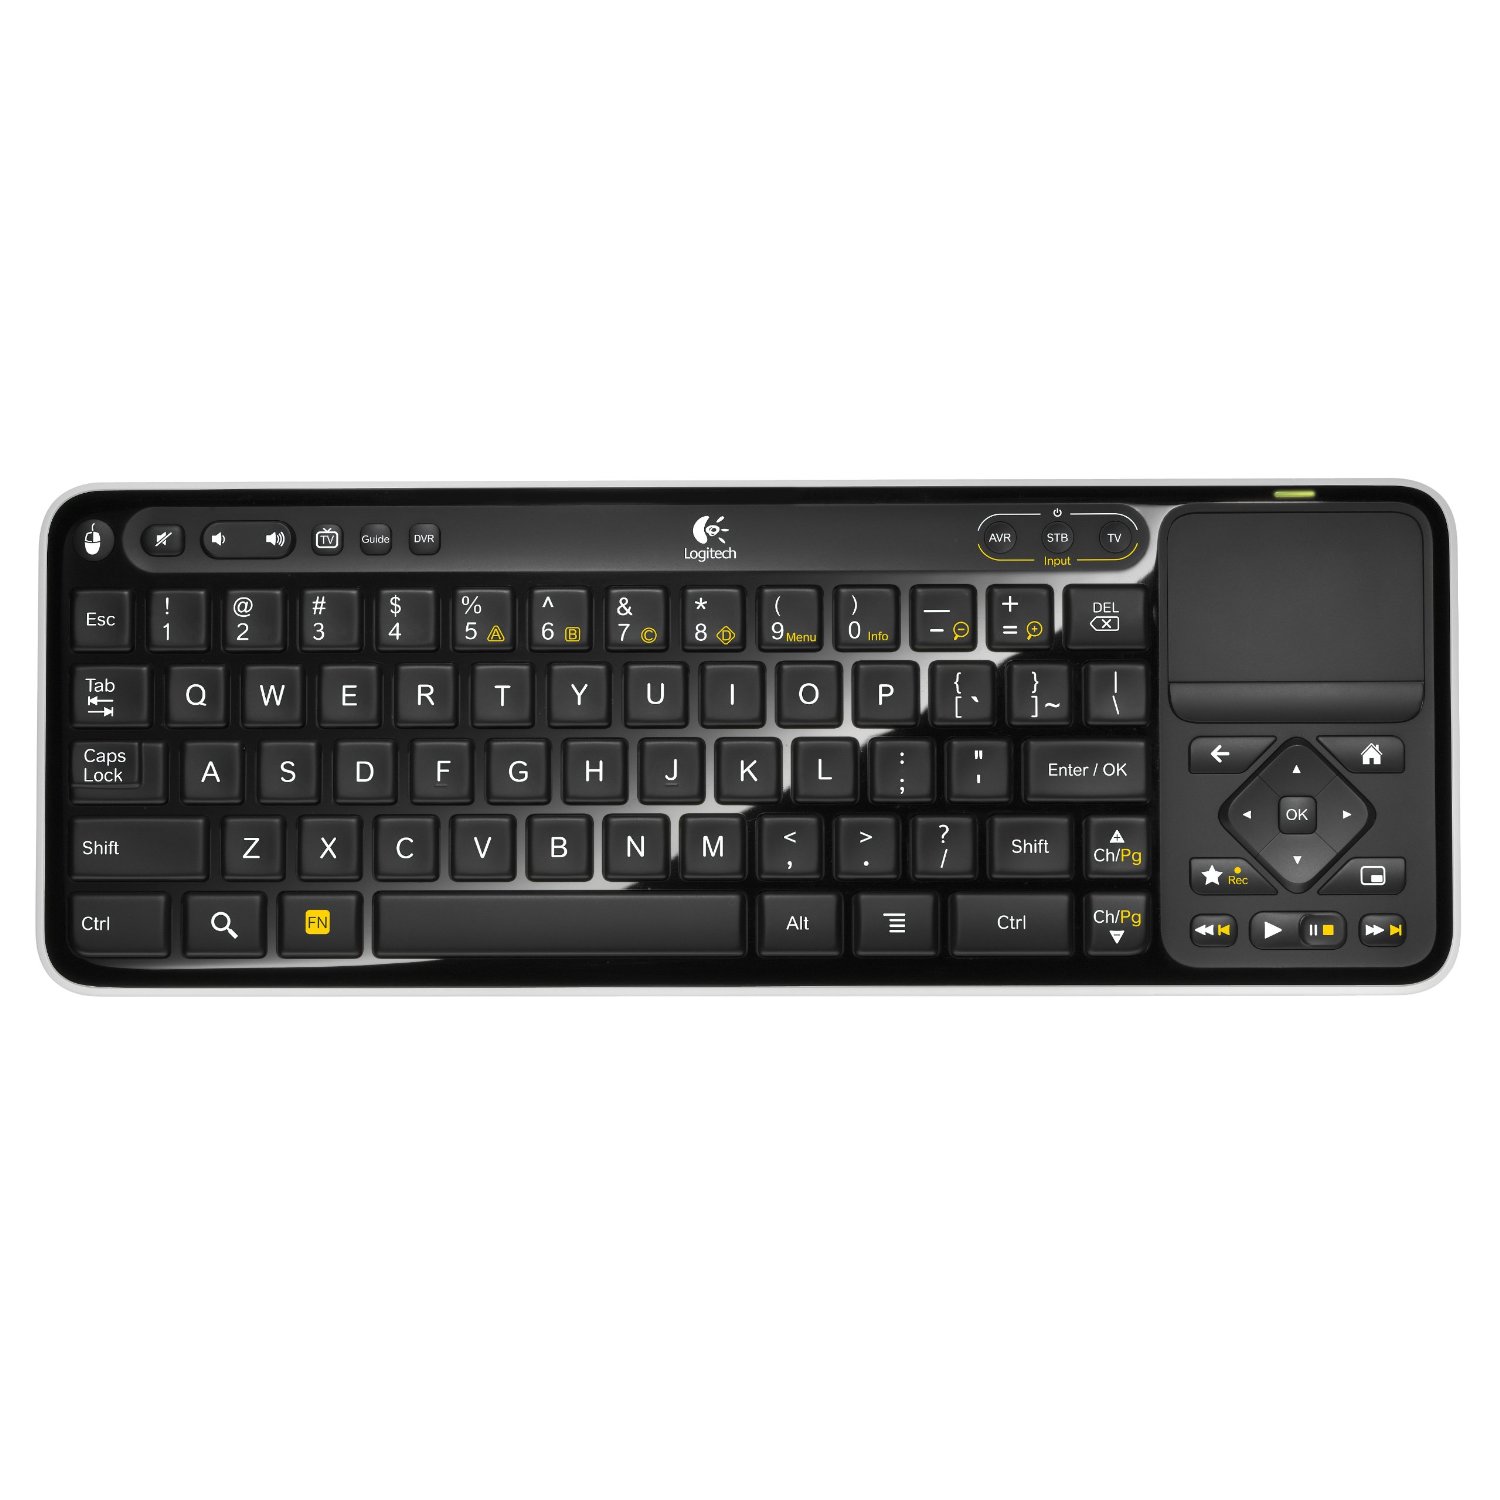 http://thetechjournal.com/wp-content/uploads/images/1109/1316496455-logitech-revue-companion-box-with-google-tv-and-keyboard-controller-42.jpg